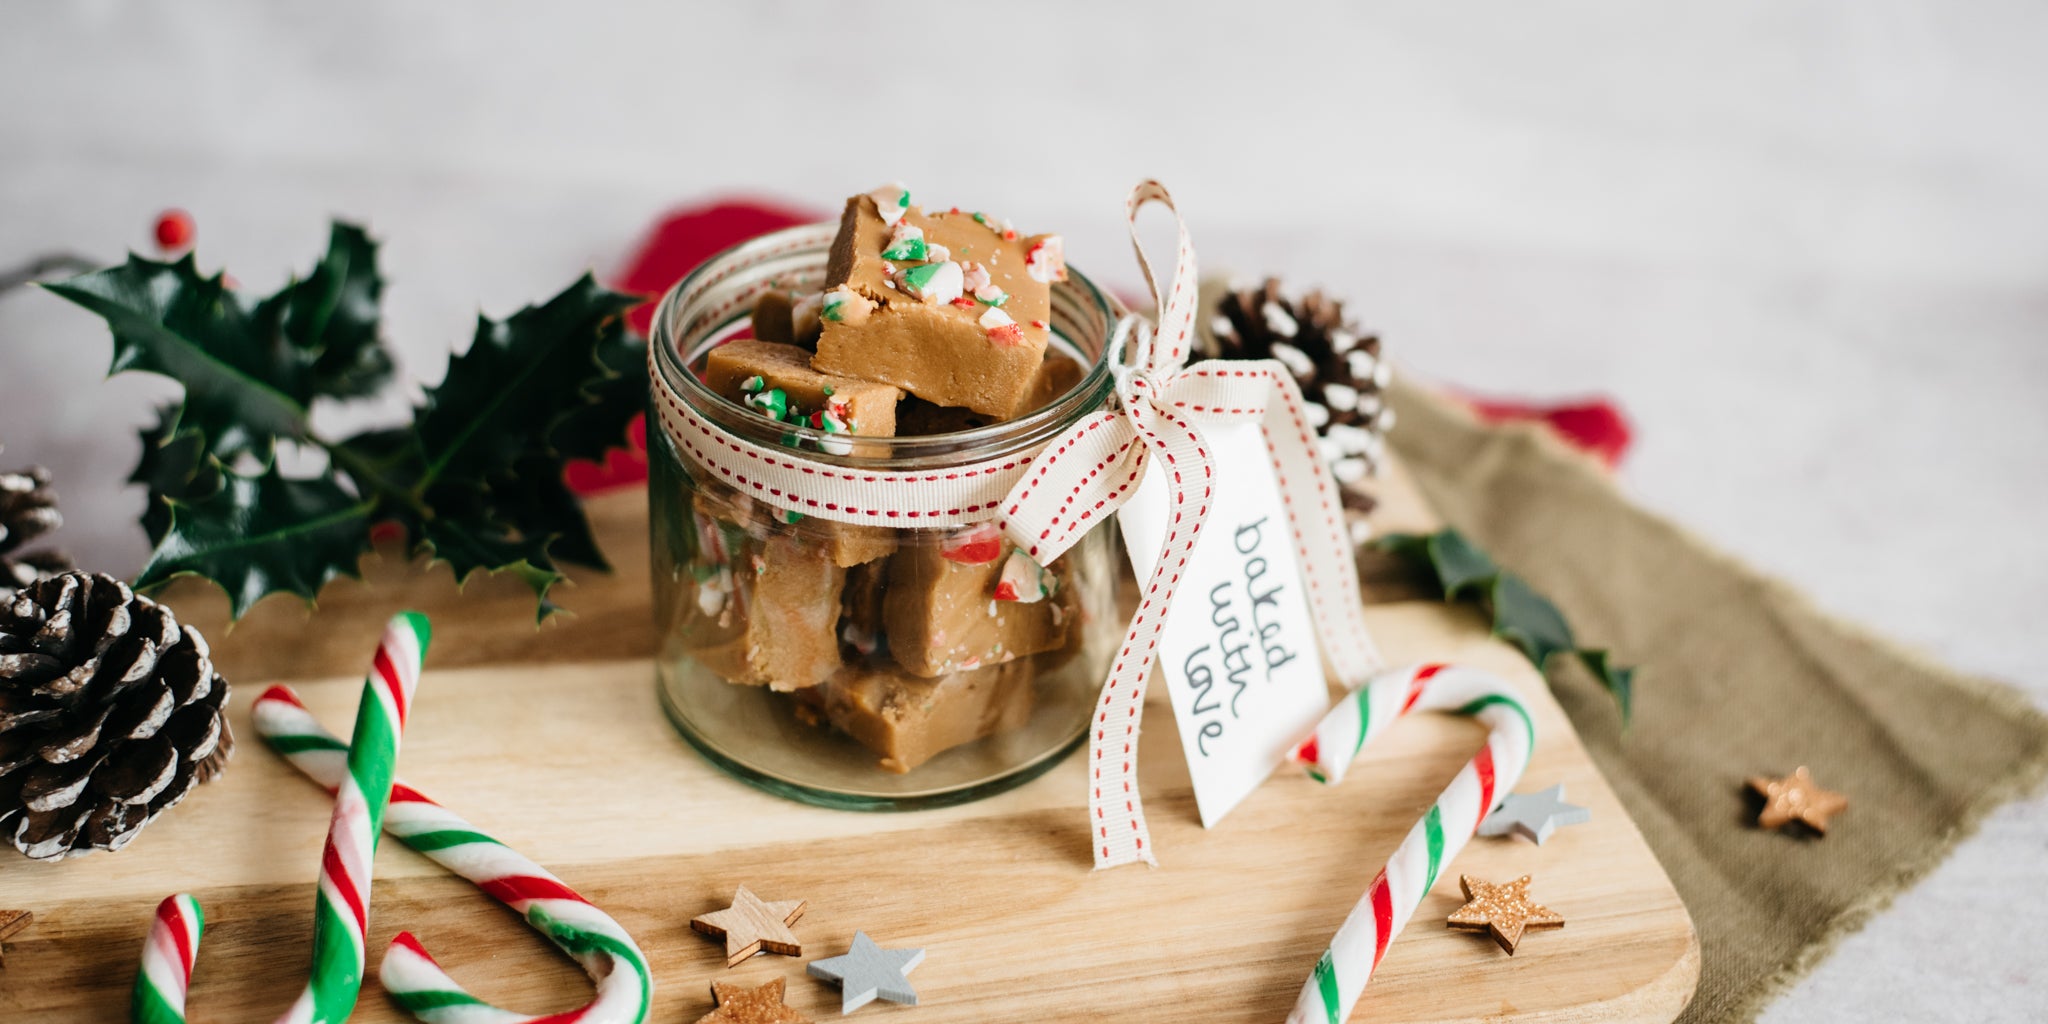 Candy Cane Fudge in a jar with a hand tied gift tag, surrounded by holly leaves, candy canes and ribbon